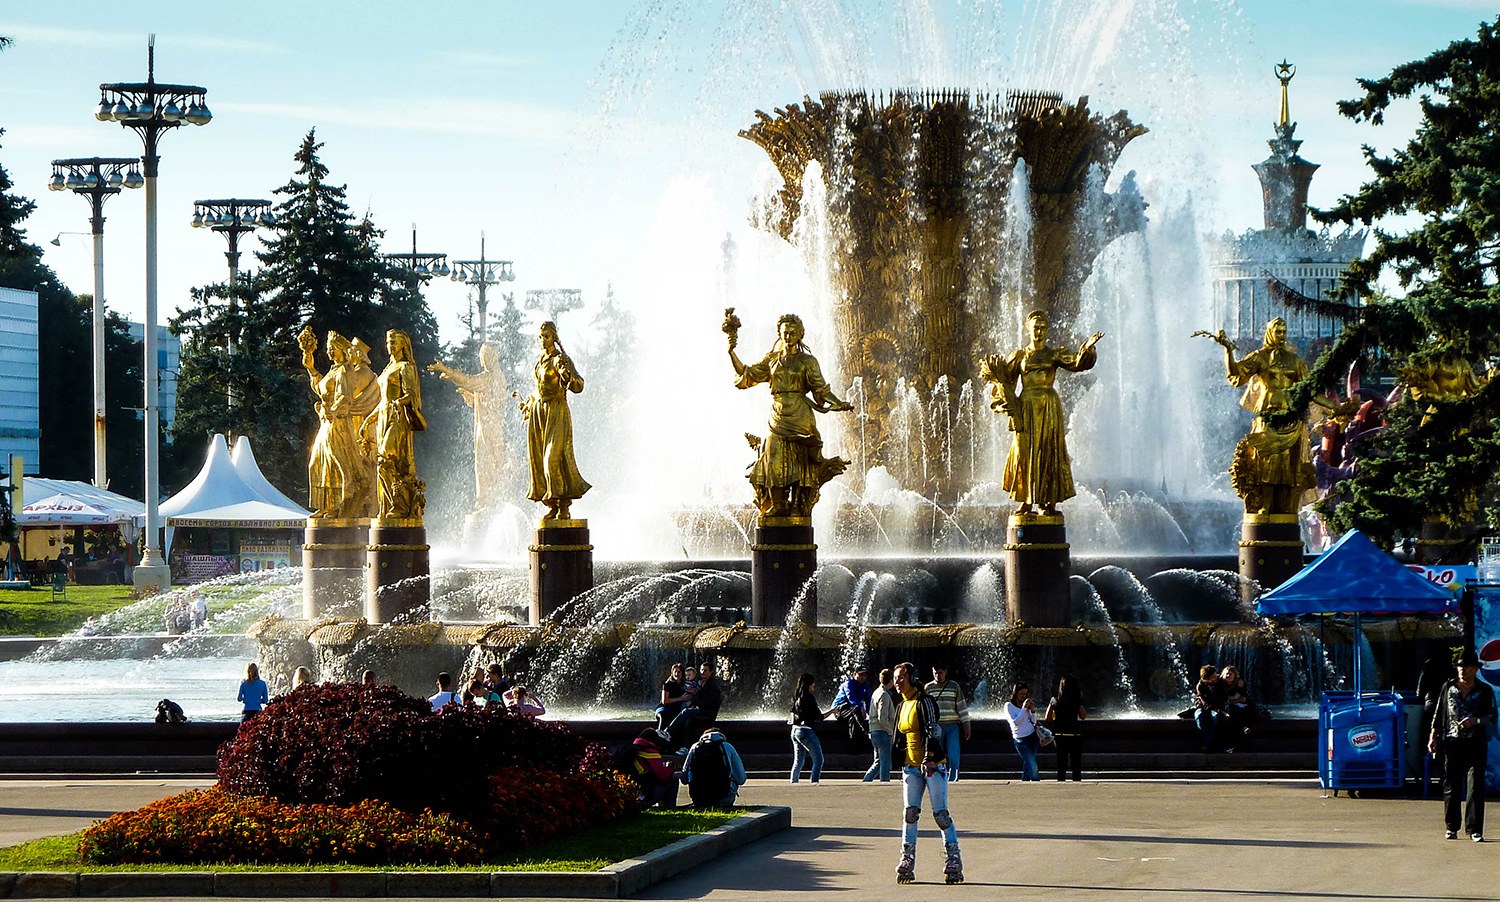 <p>The 'Friendship of Nations' fountain at Moscow's impressive VDNH grounds. Each golden statue represents one of the former republics in the Soviet Union. <br /></p>
<p>The fountain is one of several standout attractions at the Soviet-era Exhibition of Achievements of National Economy (Выставка достижений народного хозяйства, abbreviated to ВДНХ, and translated to VDNH).</p><p>While I went with the colour version of this shot, the black and white brings out some interesting details (see below).</p>